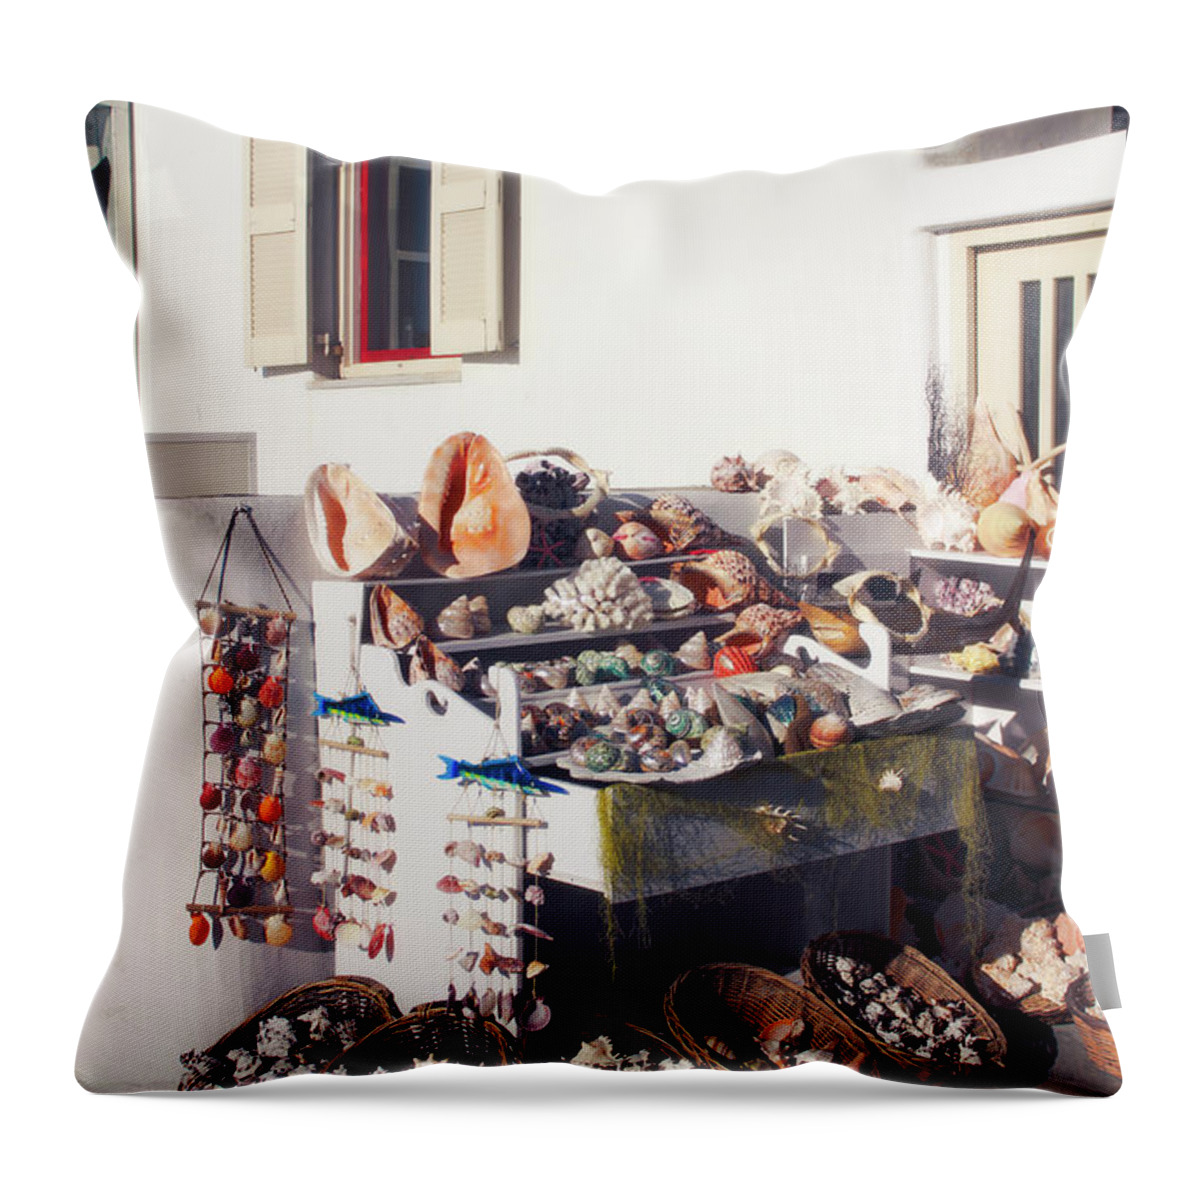 Store Mykonos Throw Pillow featuring the photograph She Sells Seashells Mykonos by Donna L Munro